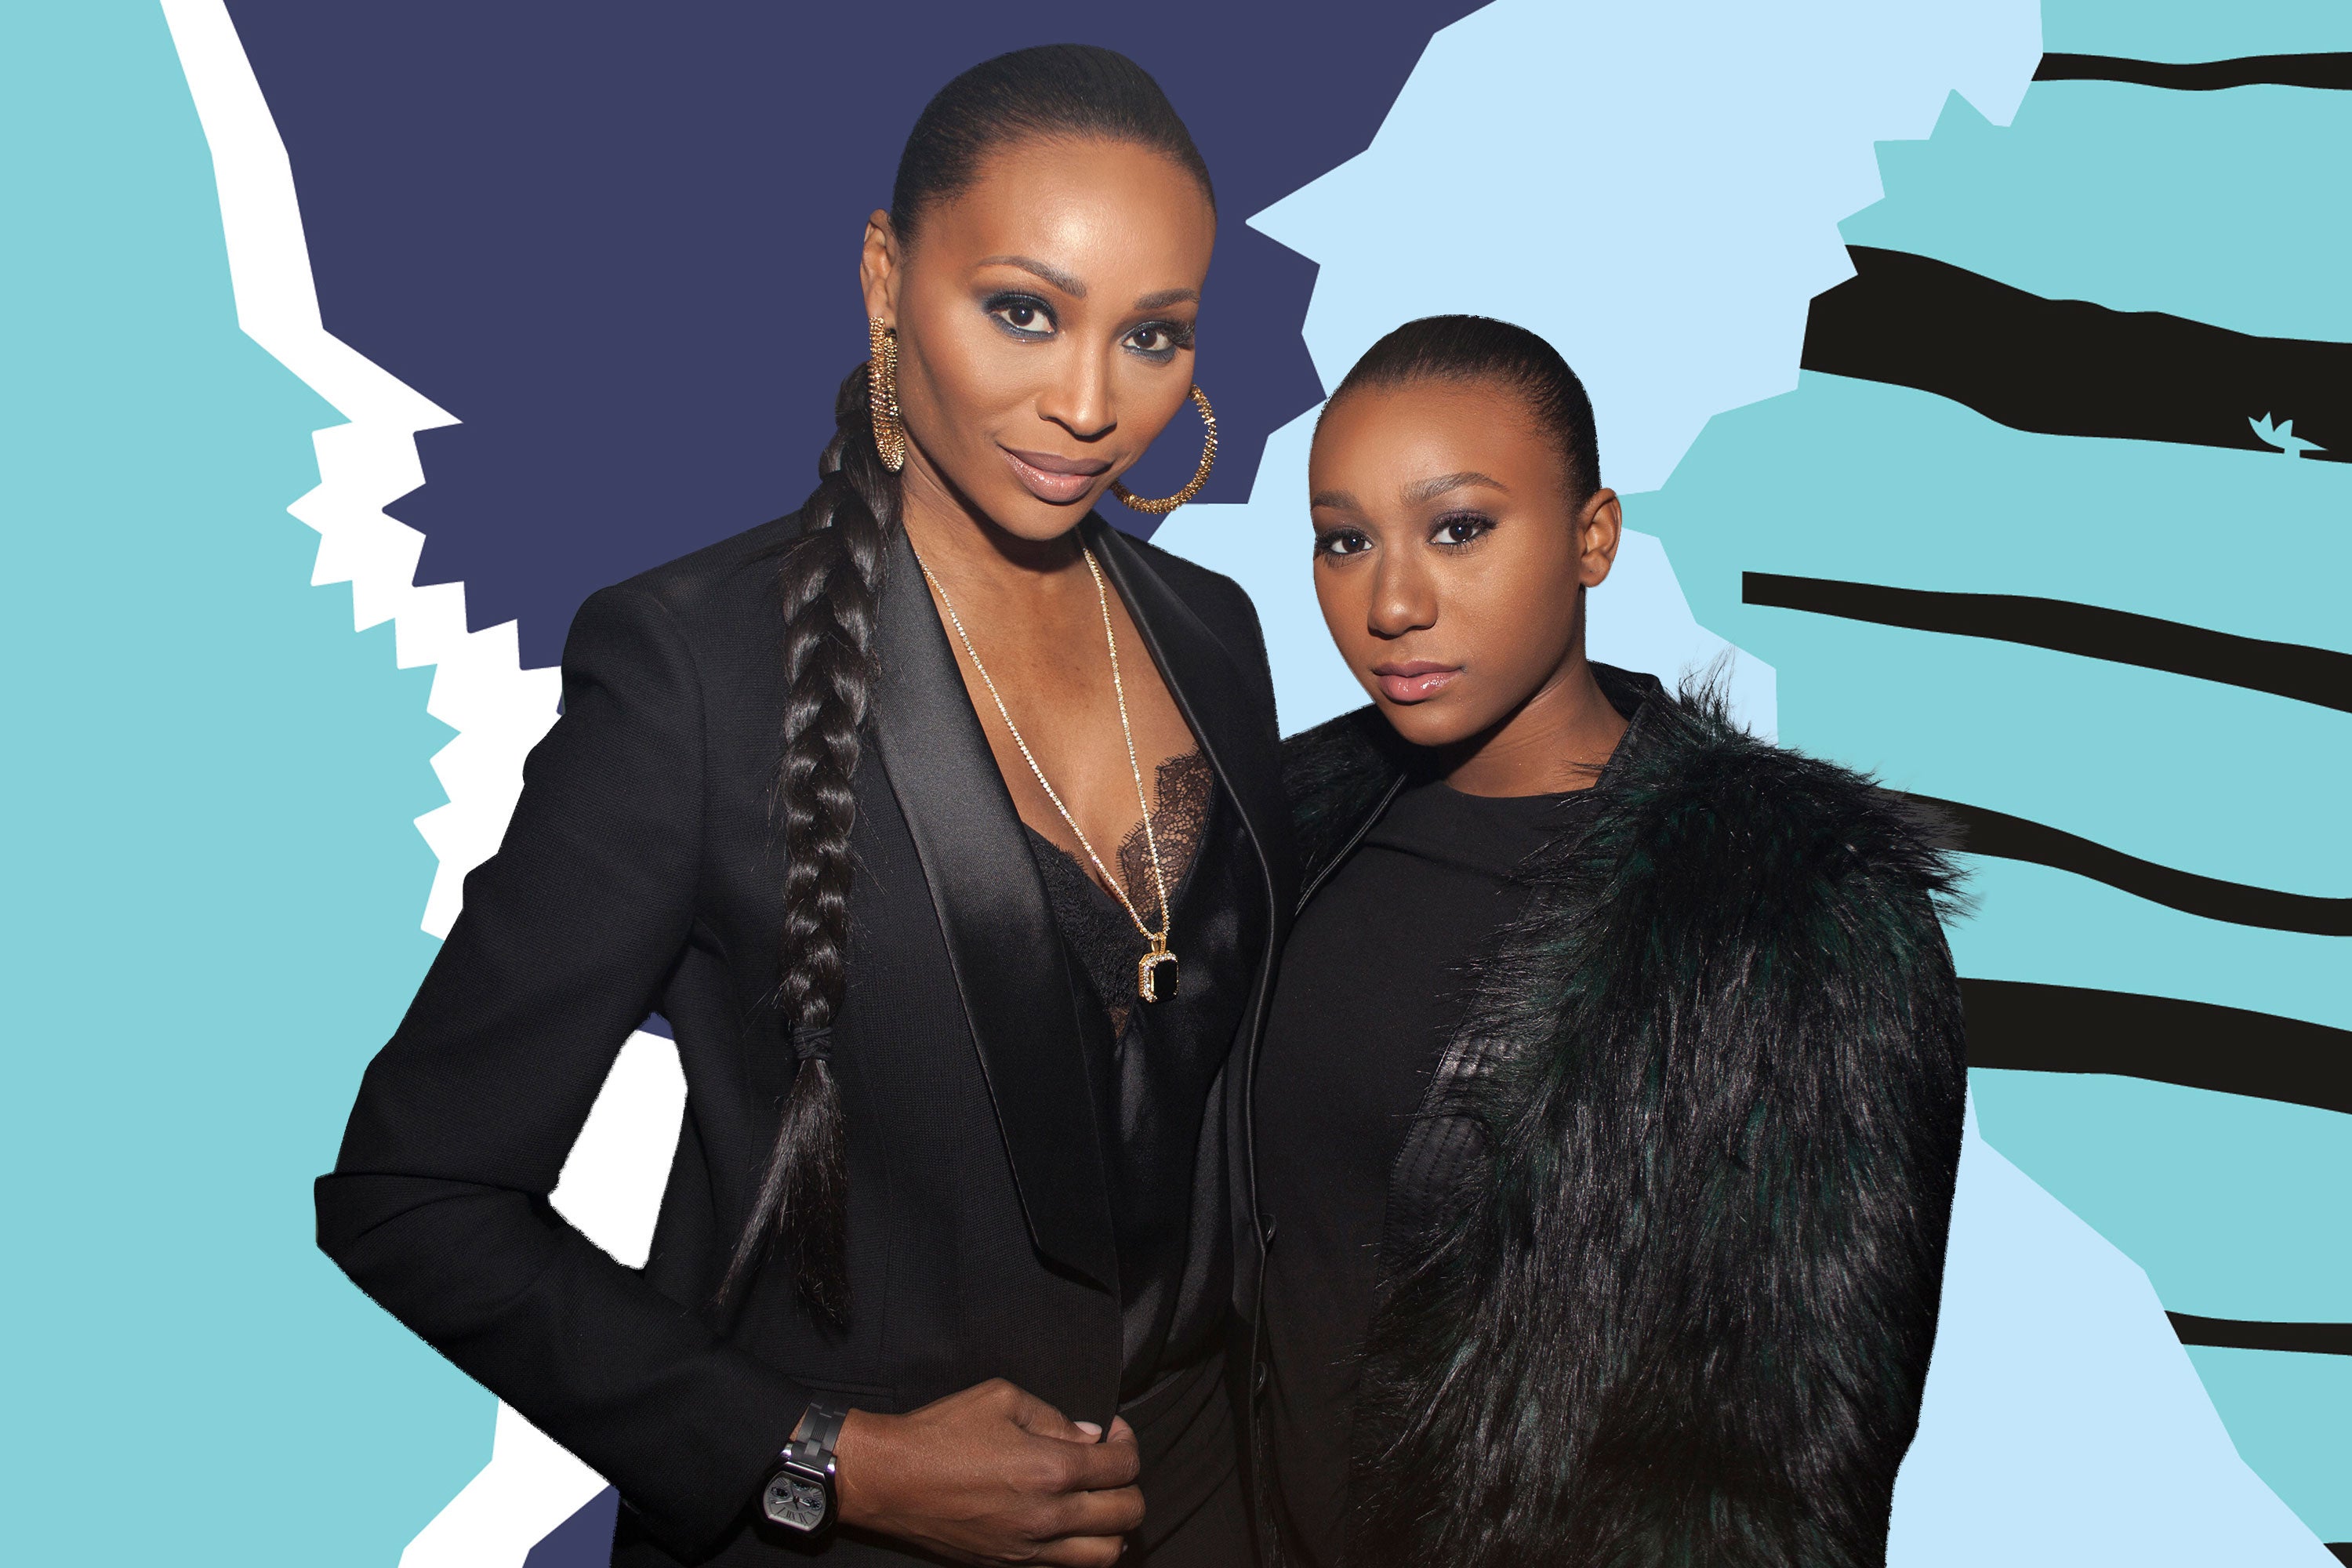 You'll Never Guess Where 'RHOA' Star Cynthia Bailey's Daughter Noelle Is Interning